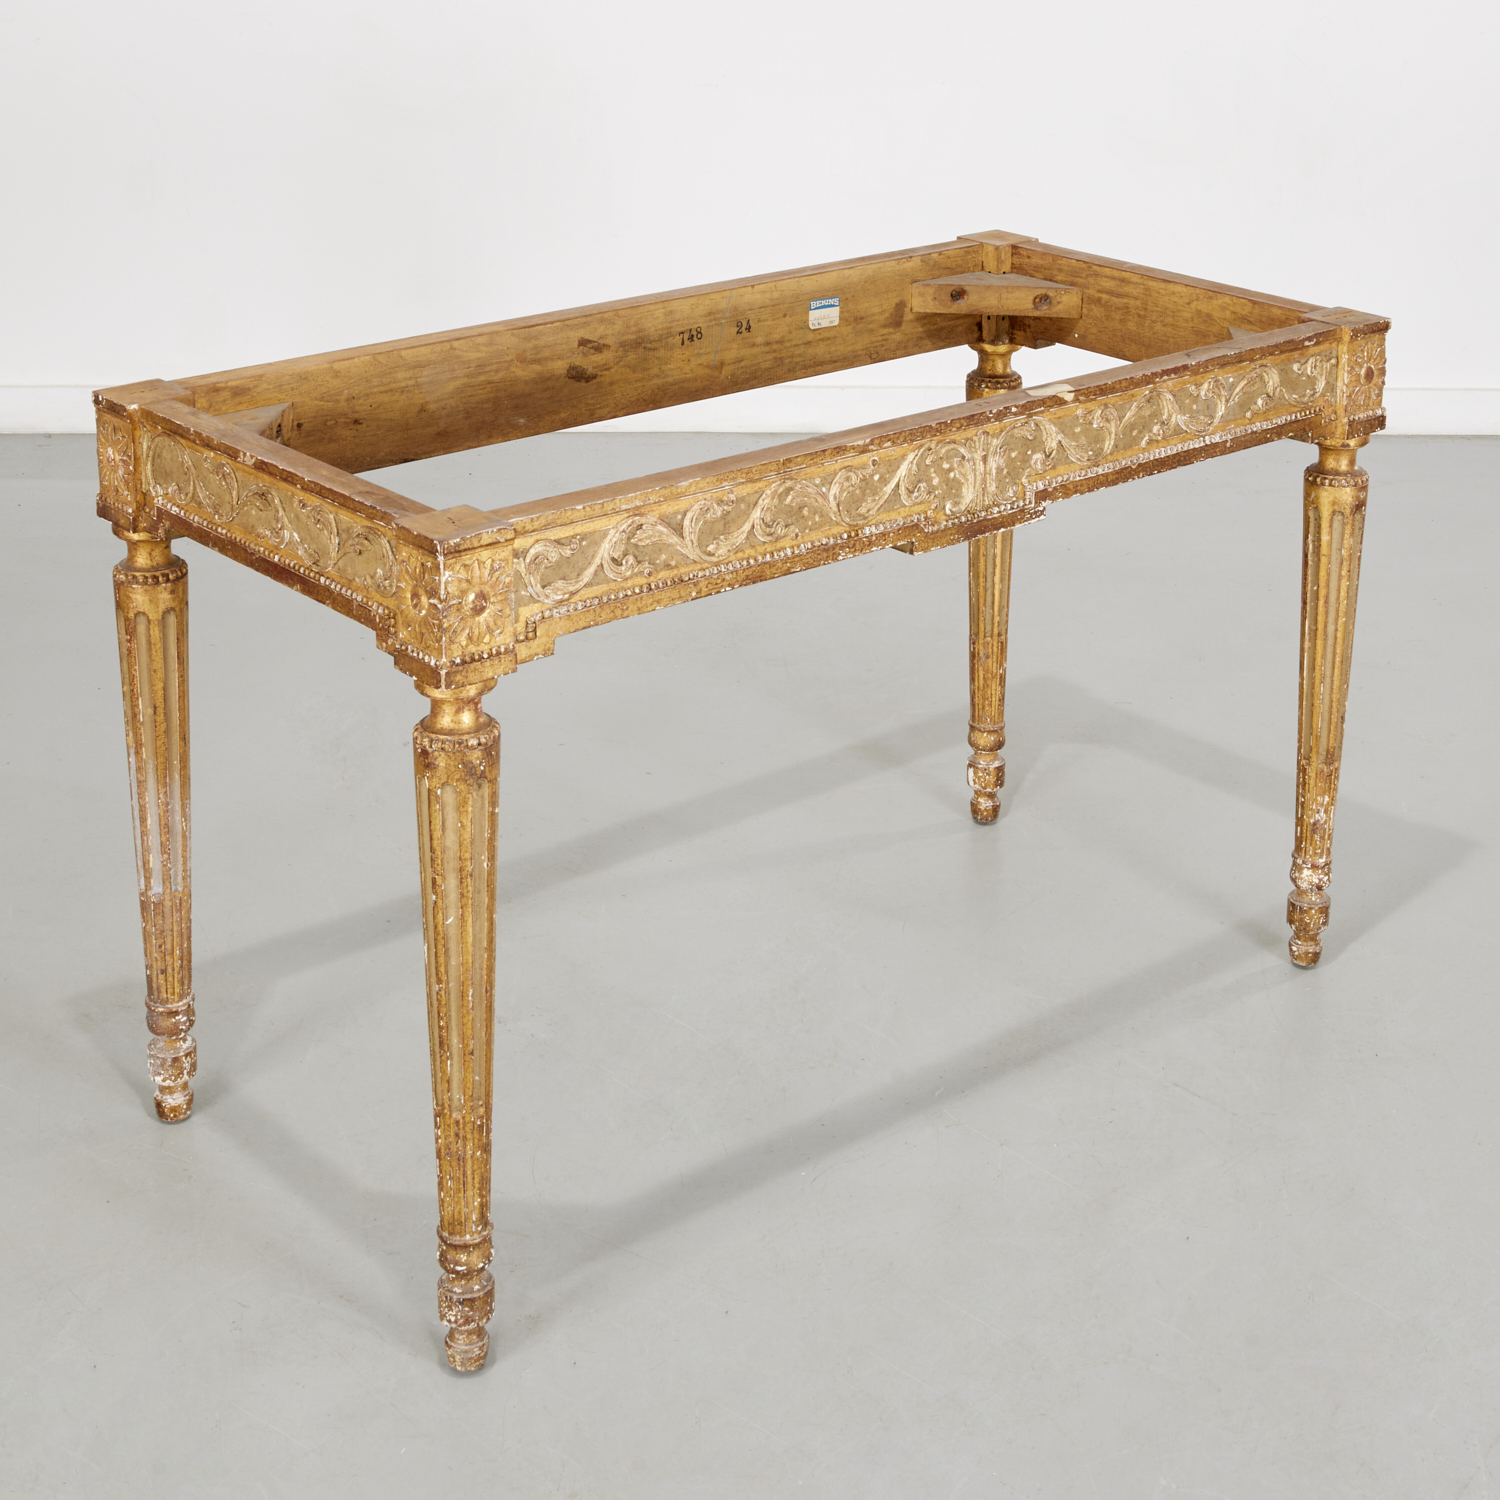 LOUIS XVI STYLE CONSOLE TABLE  2fc504